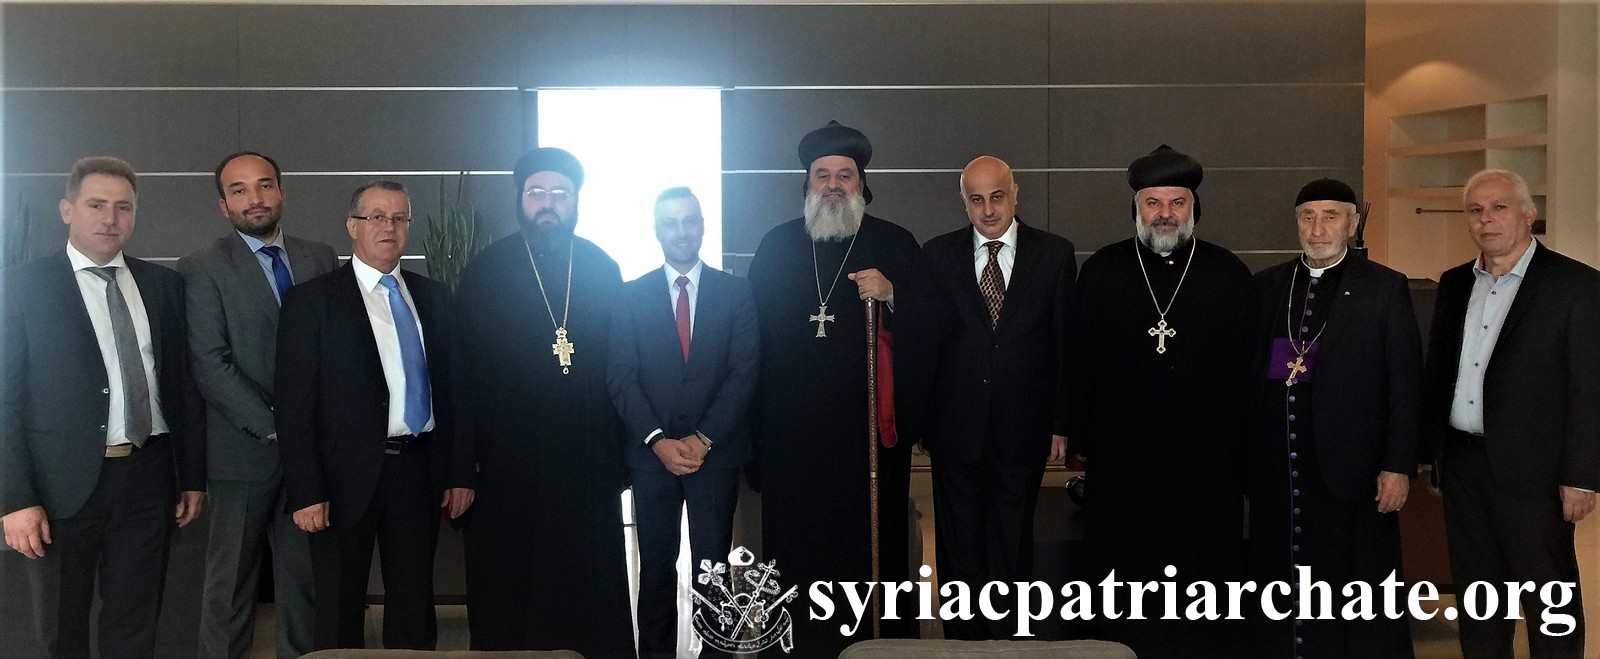 Patriarch Ignatius Aphrem II Arrives in Brussels for the first Apostolic Visit